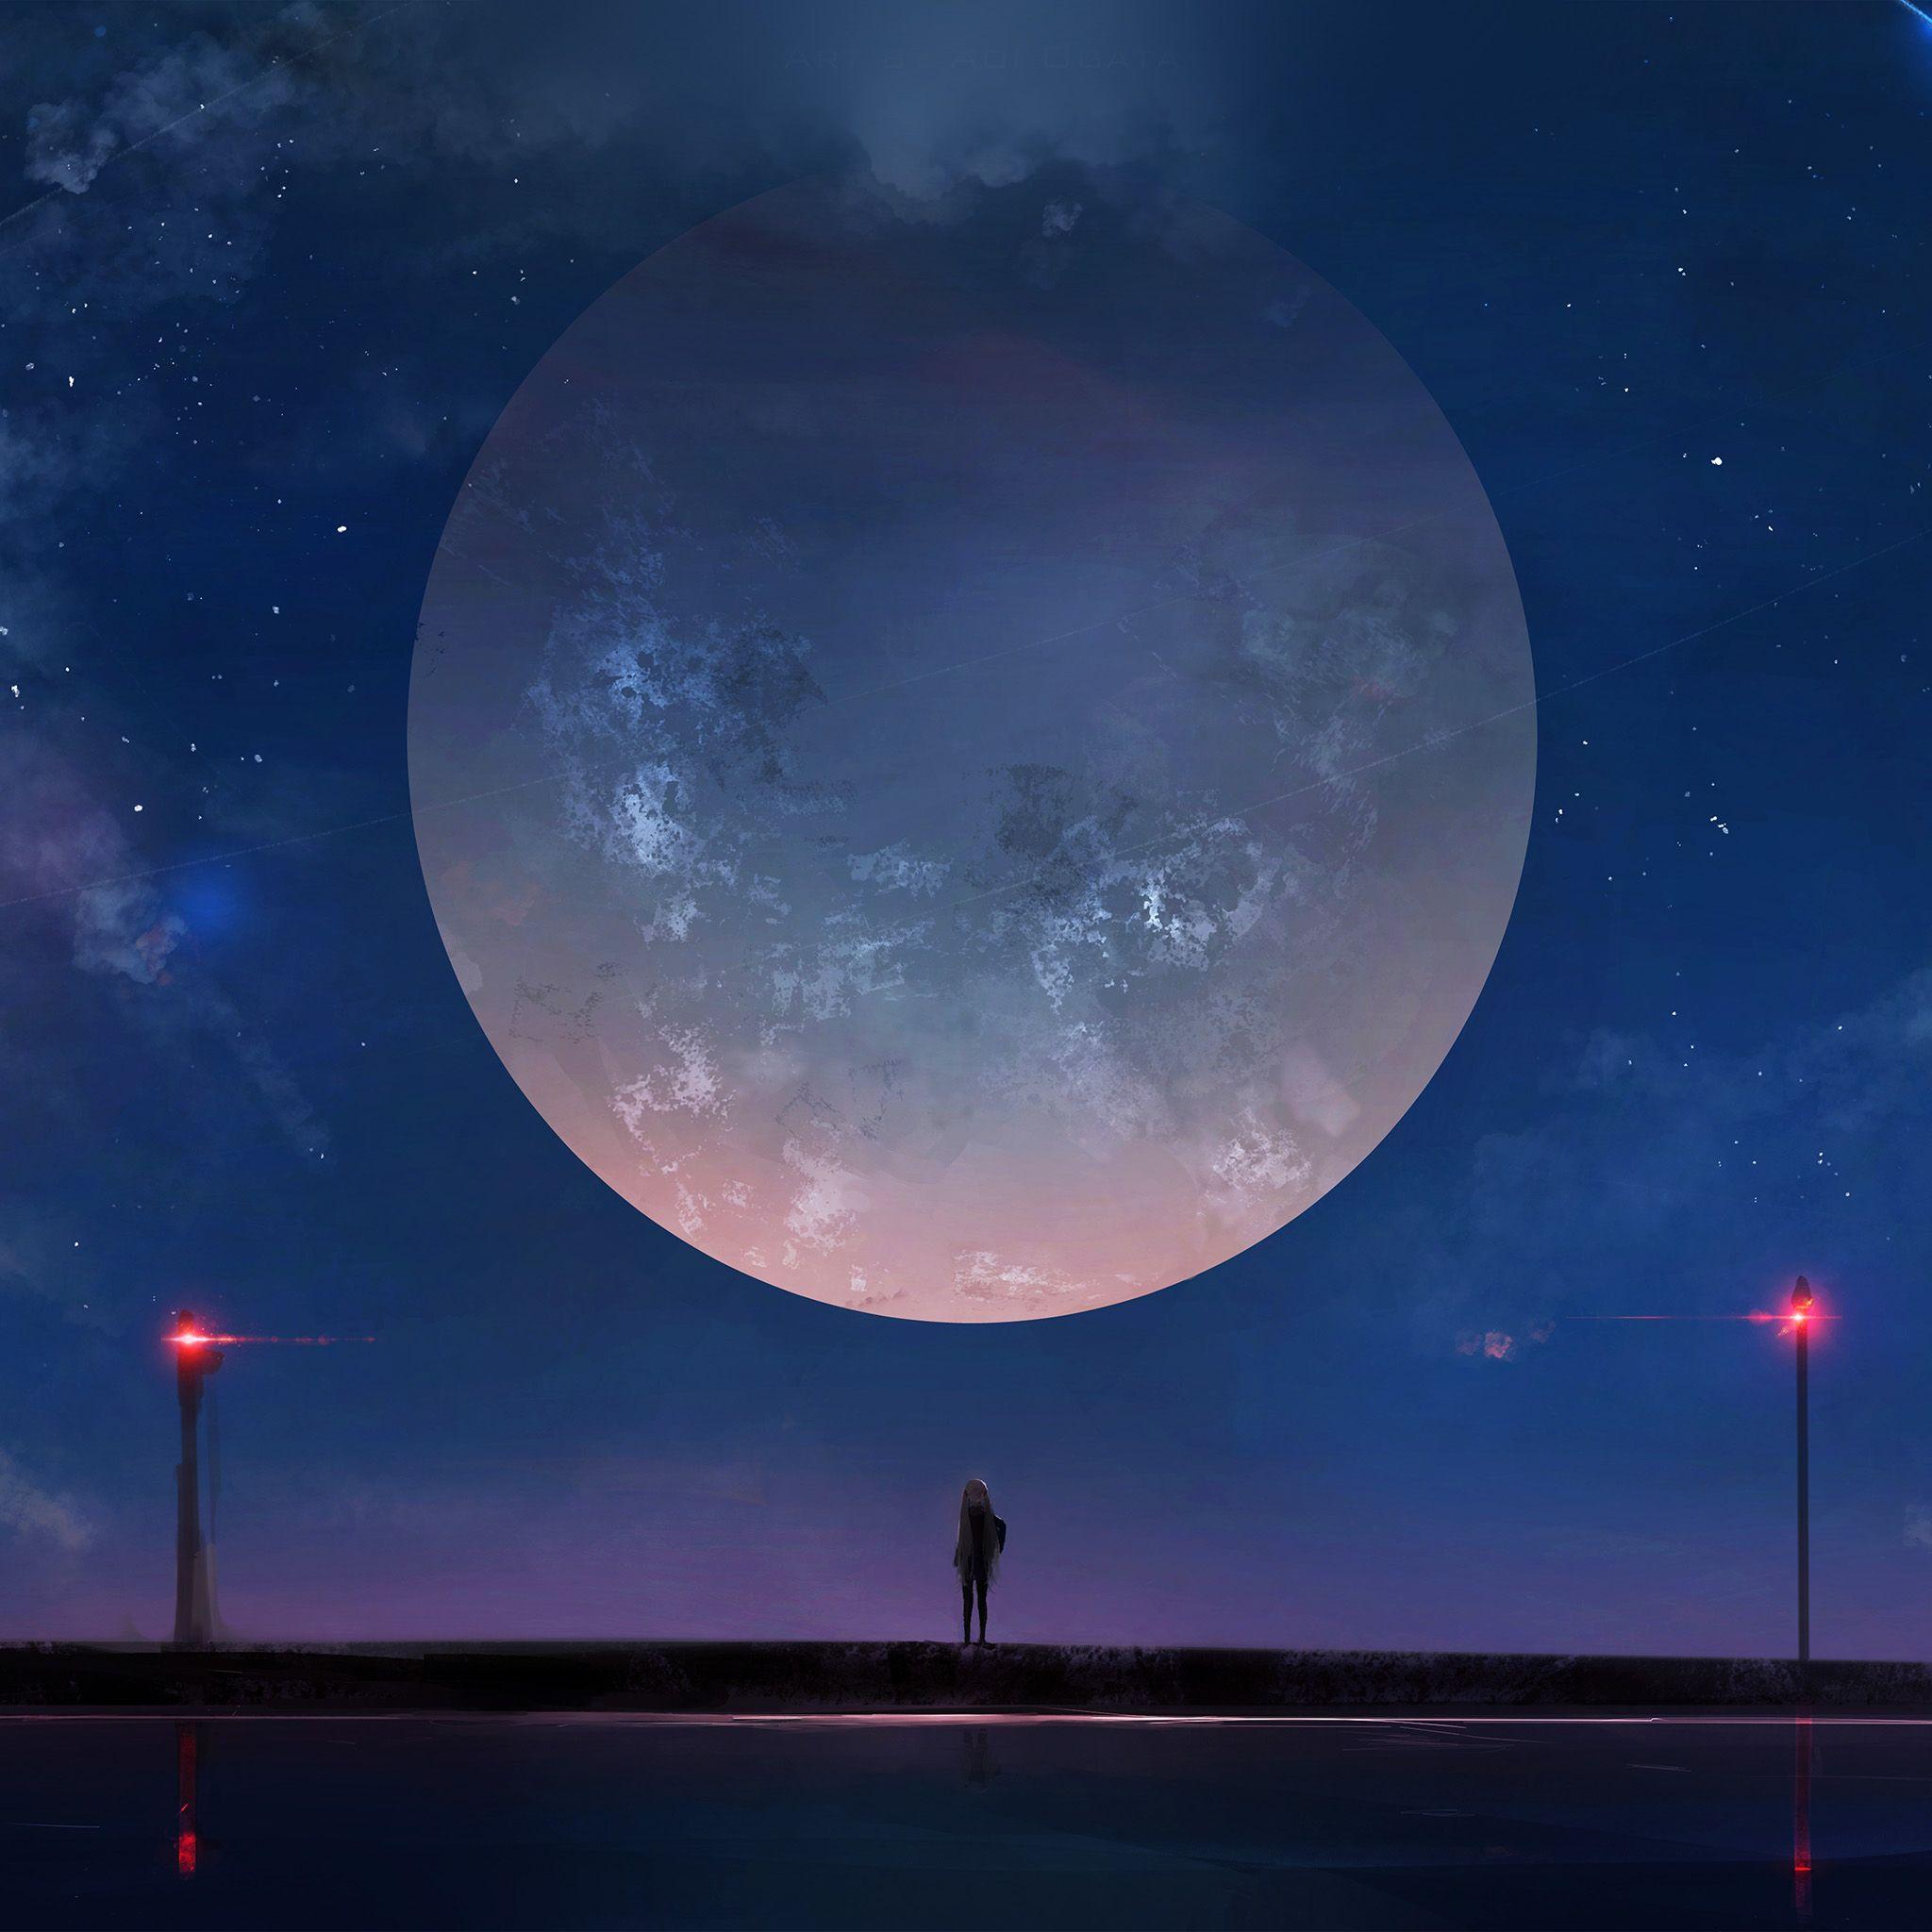 Anime Moonlight Wallpapers - Top Free Anime Moonlight Backgrounds